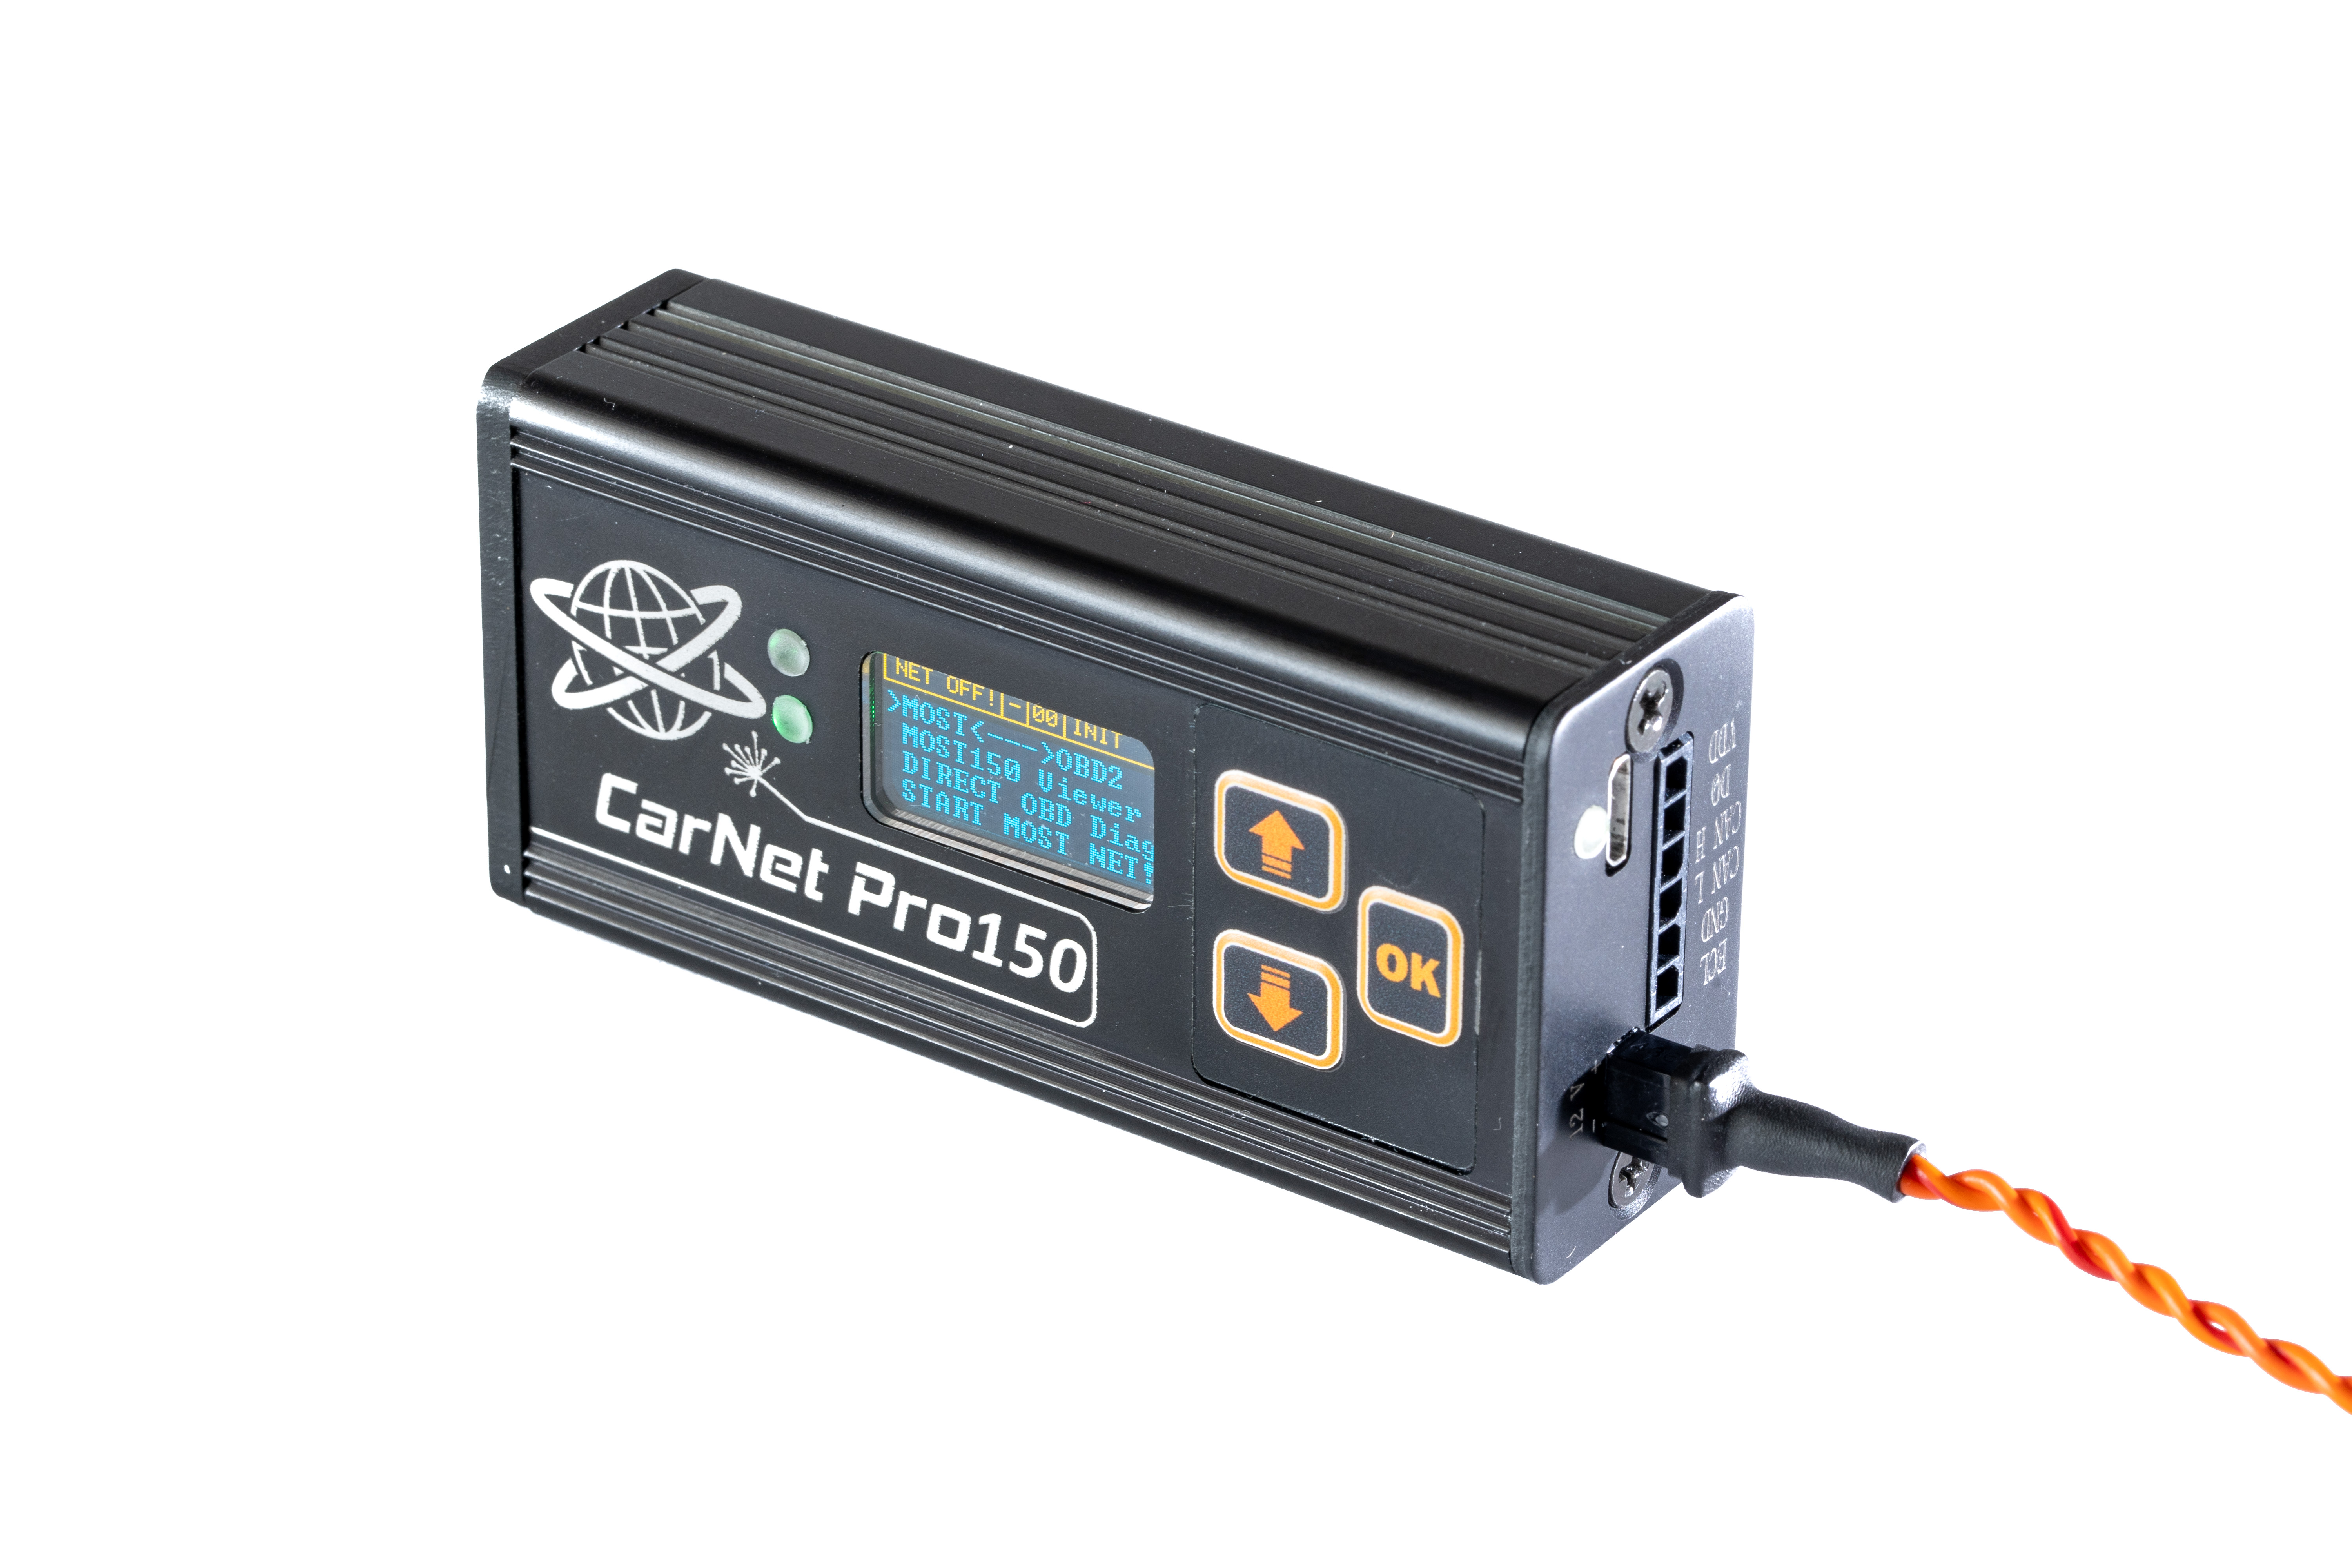 CarNet Pro150 Does Not Have Any Competitors 100% Exceptional Design Unique And Professional MOST System Based Device For Automotive Diagnostics And Electronic Module Reprogramming